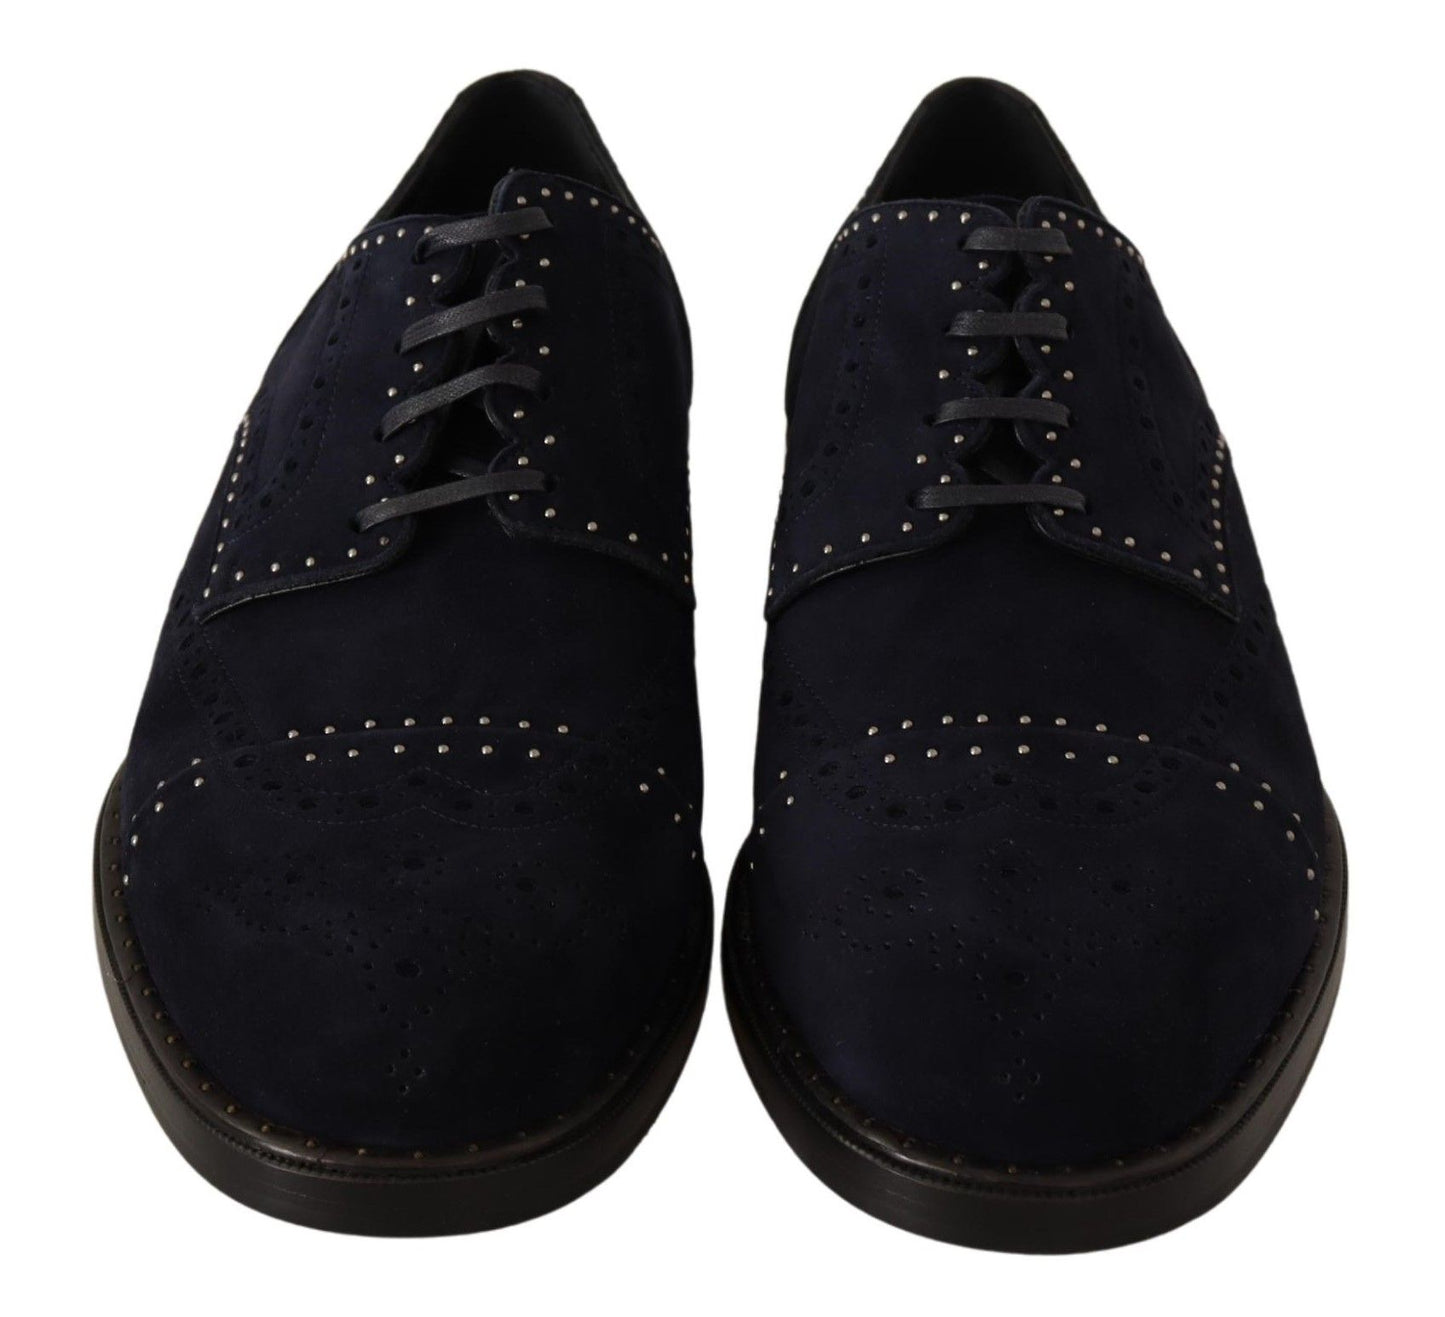 Blue Suede Leather Derby Studded Shoes